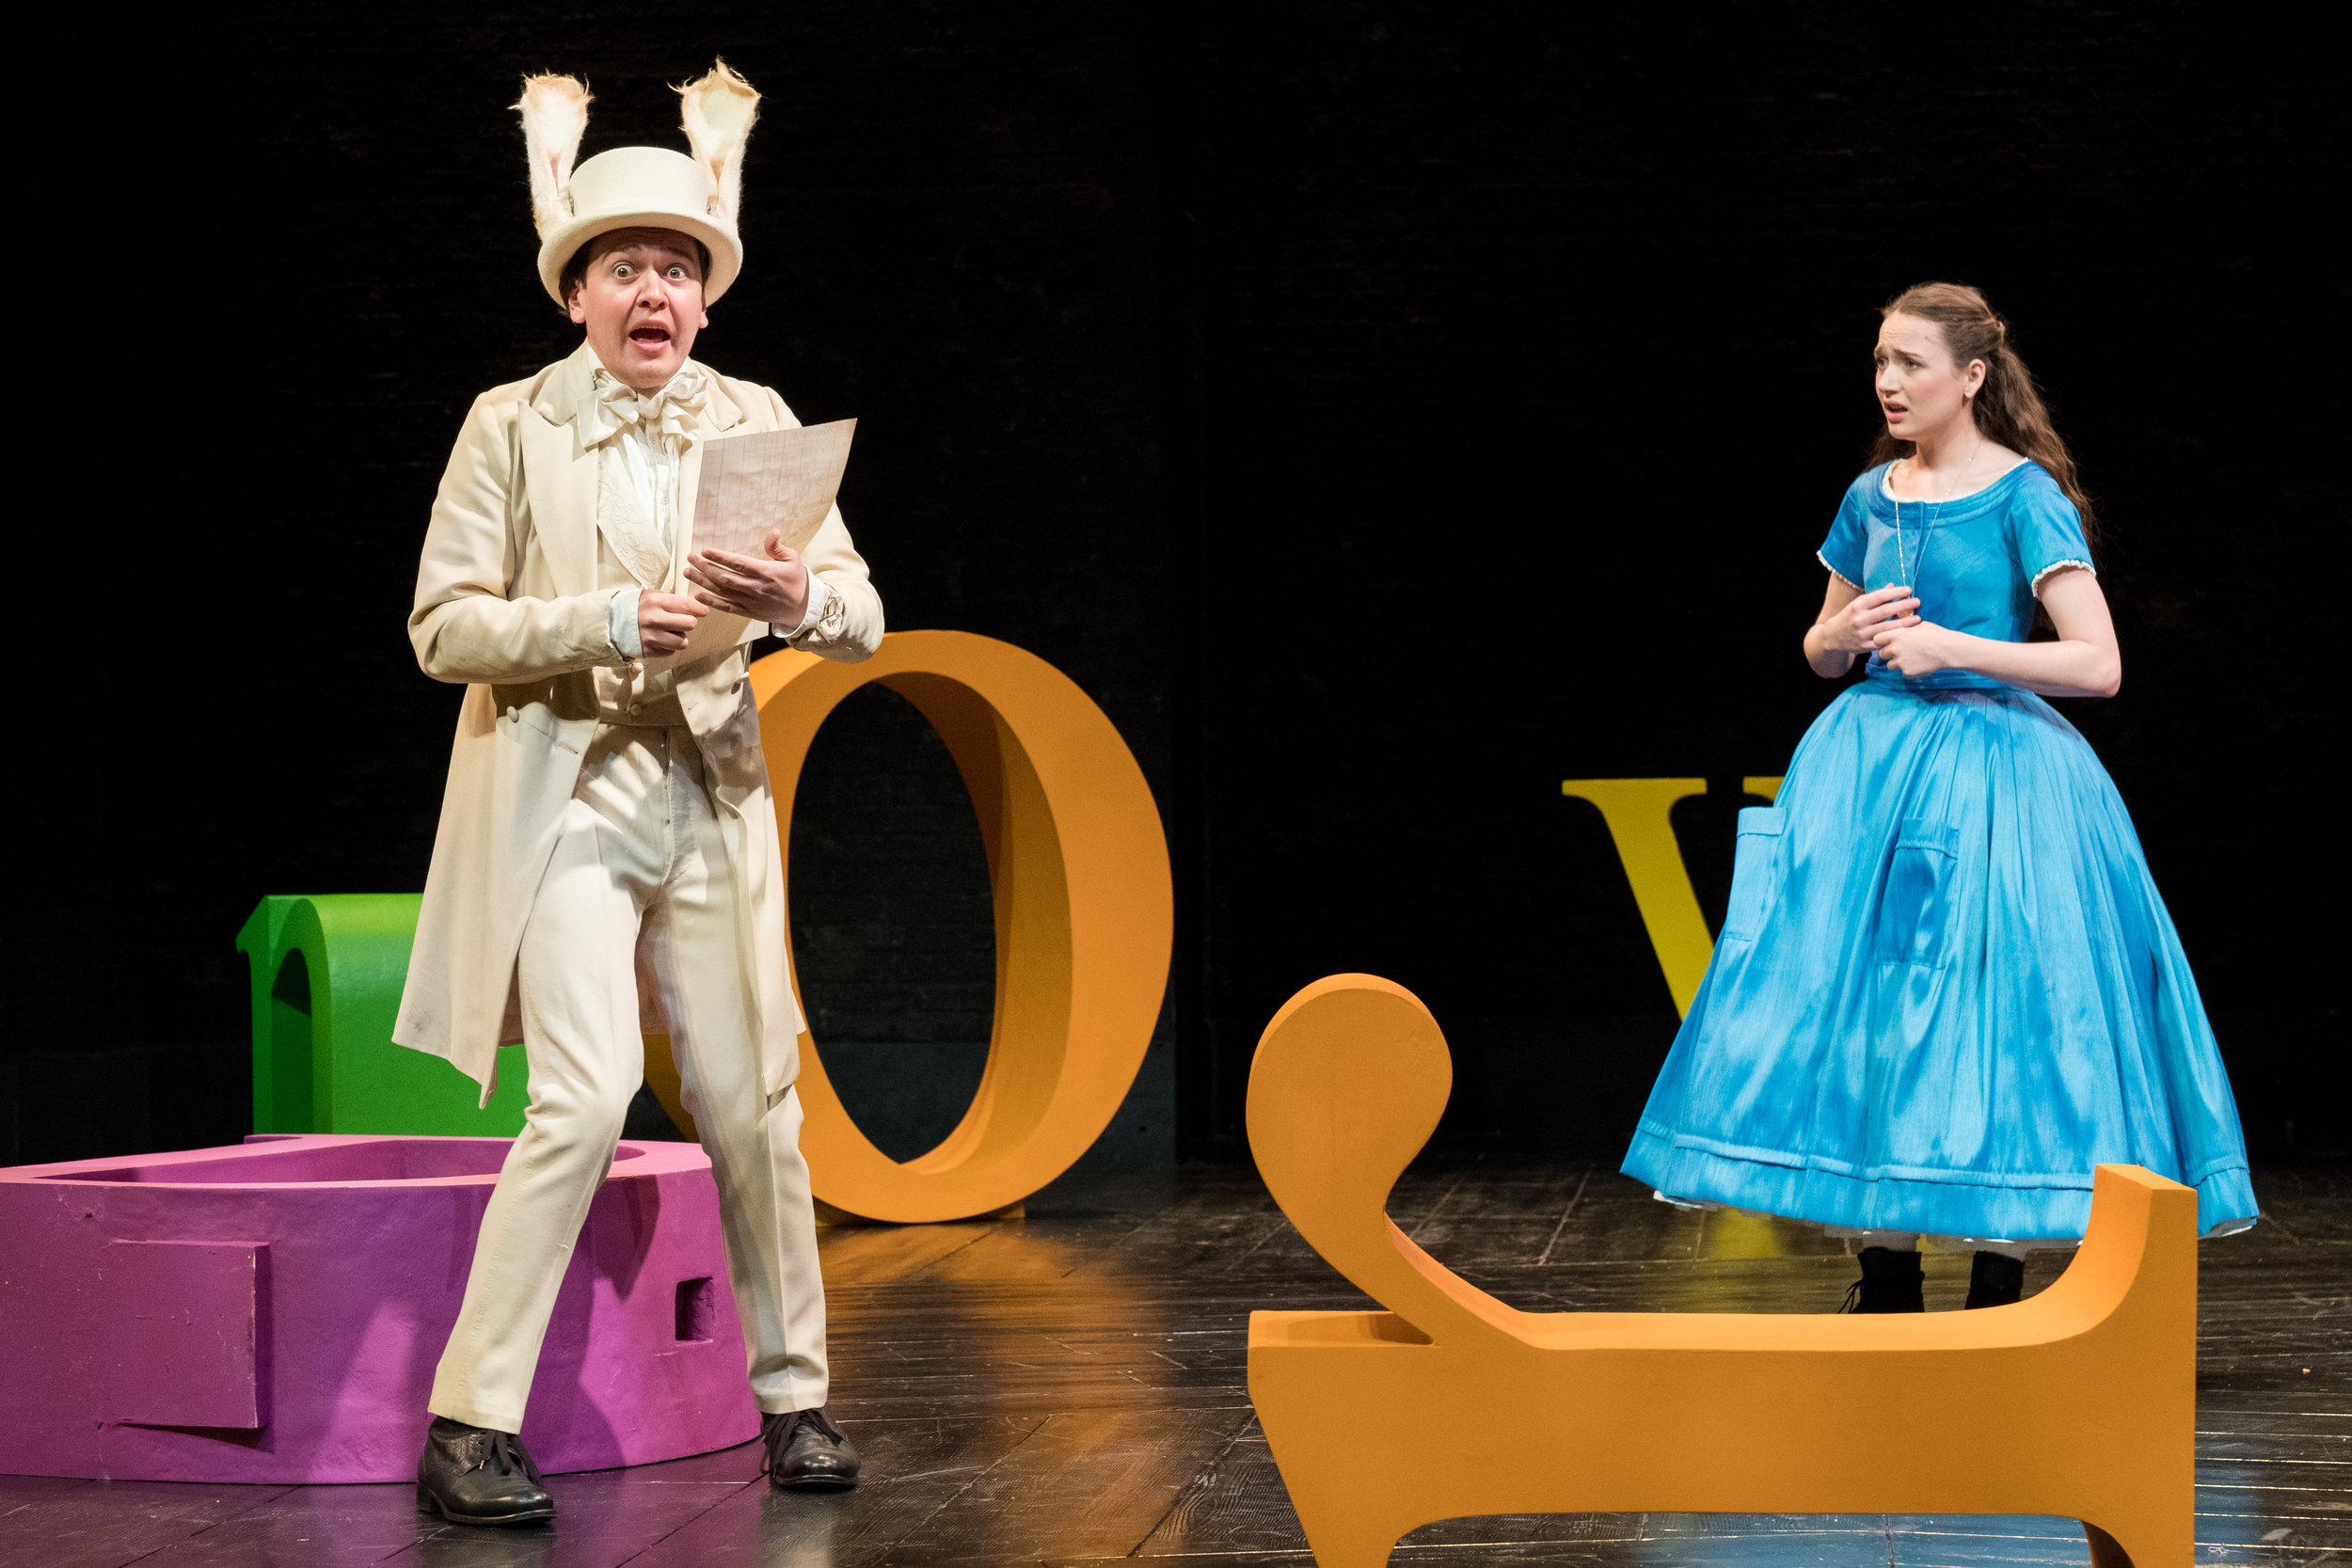  Tom Connor &amp; Rebecca Birch in Alice in Wonderland, Storyhouse, composed by Jude Obermüller (photo by Mark Carline) 